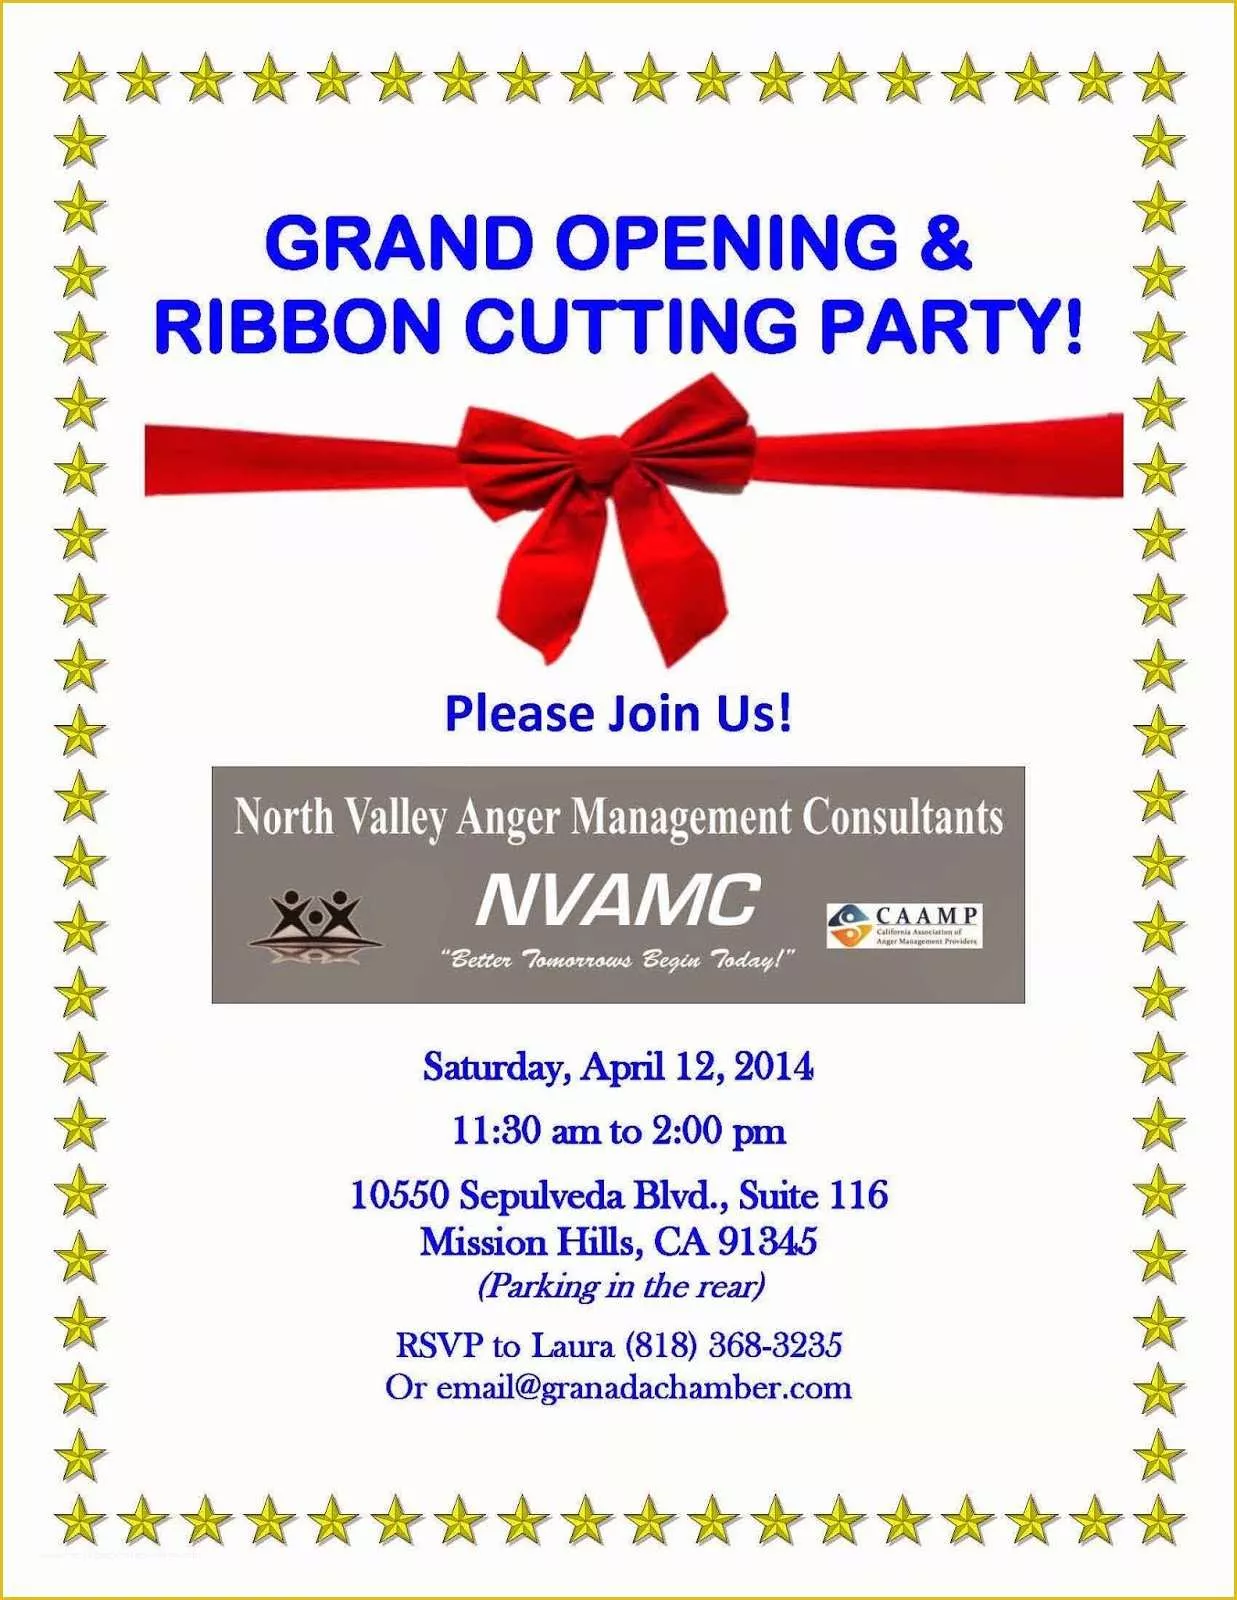 Ribbon Cutting Ceremony Invitation Template Free Of Anger Management for Modern Life Grand Opening &amp; Ribbon